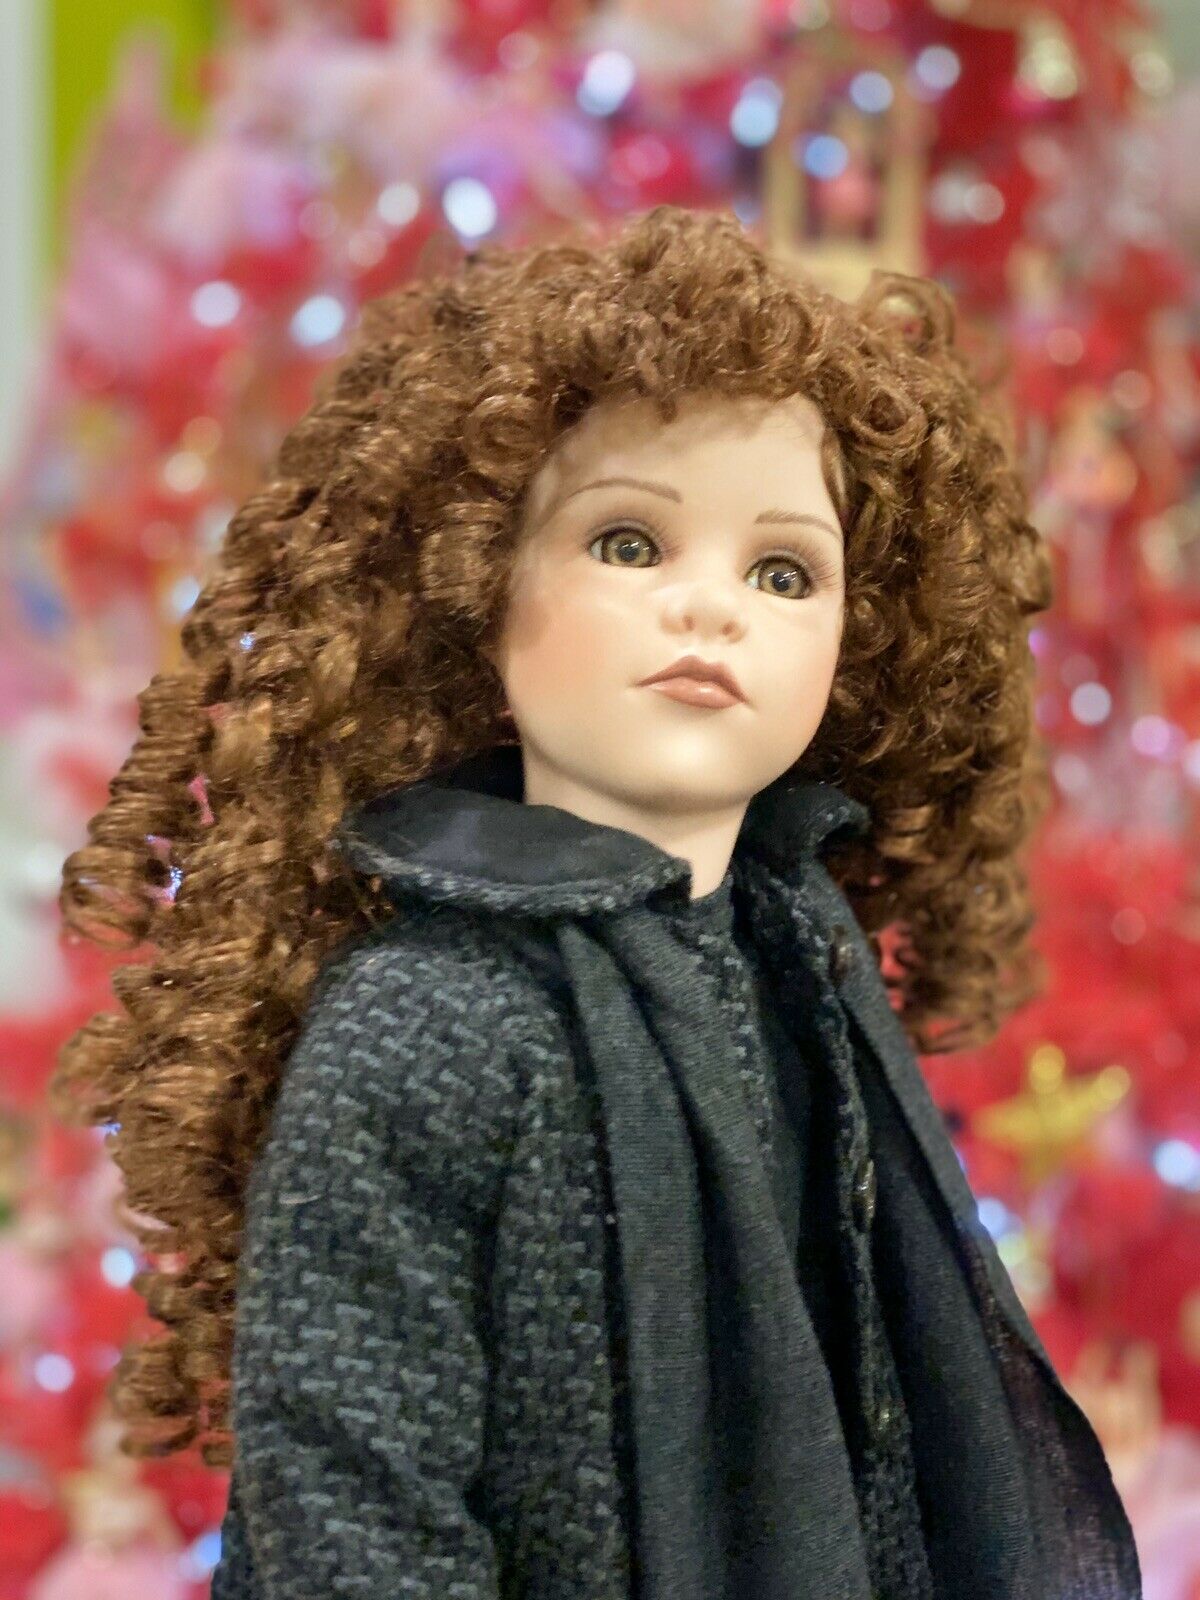 Phoebe Porcelain Doll 22” Show Stoppers